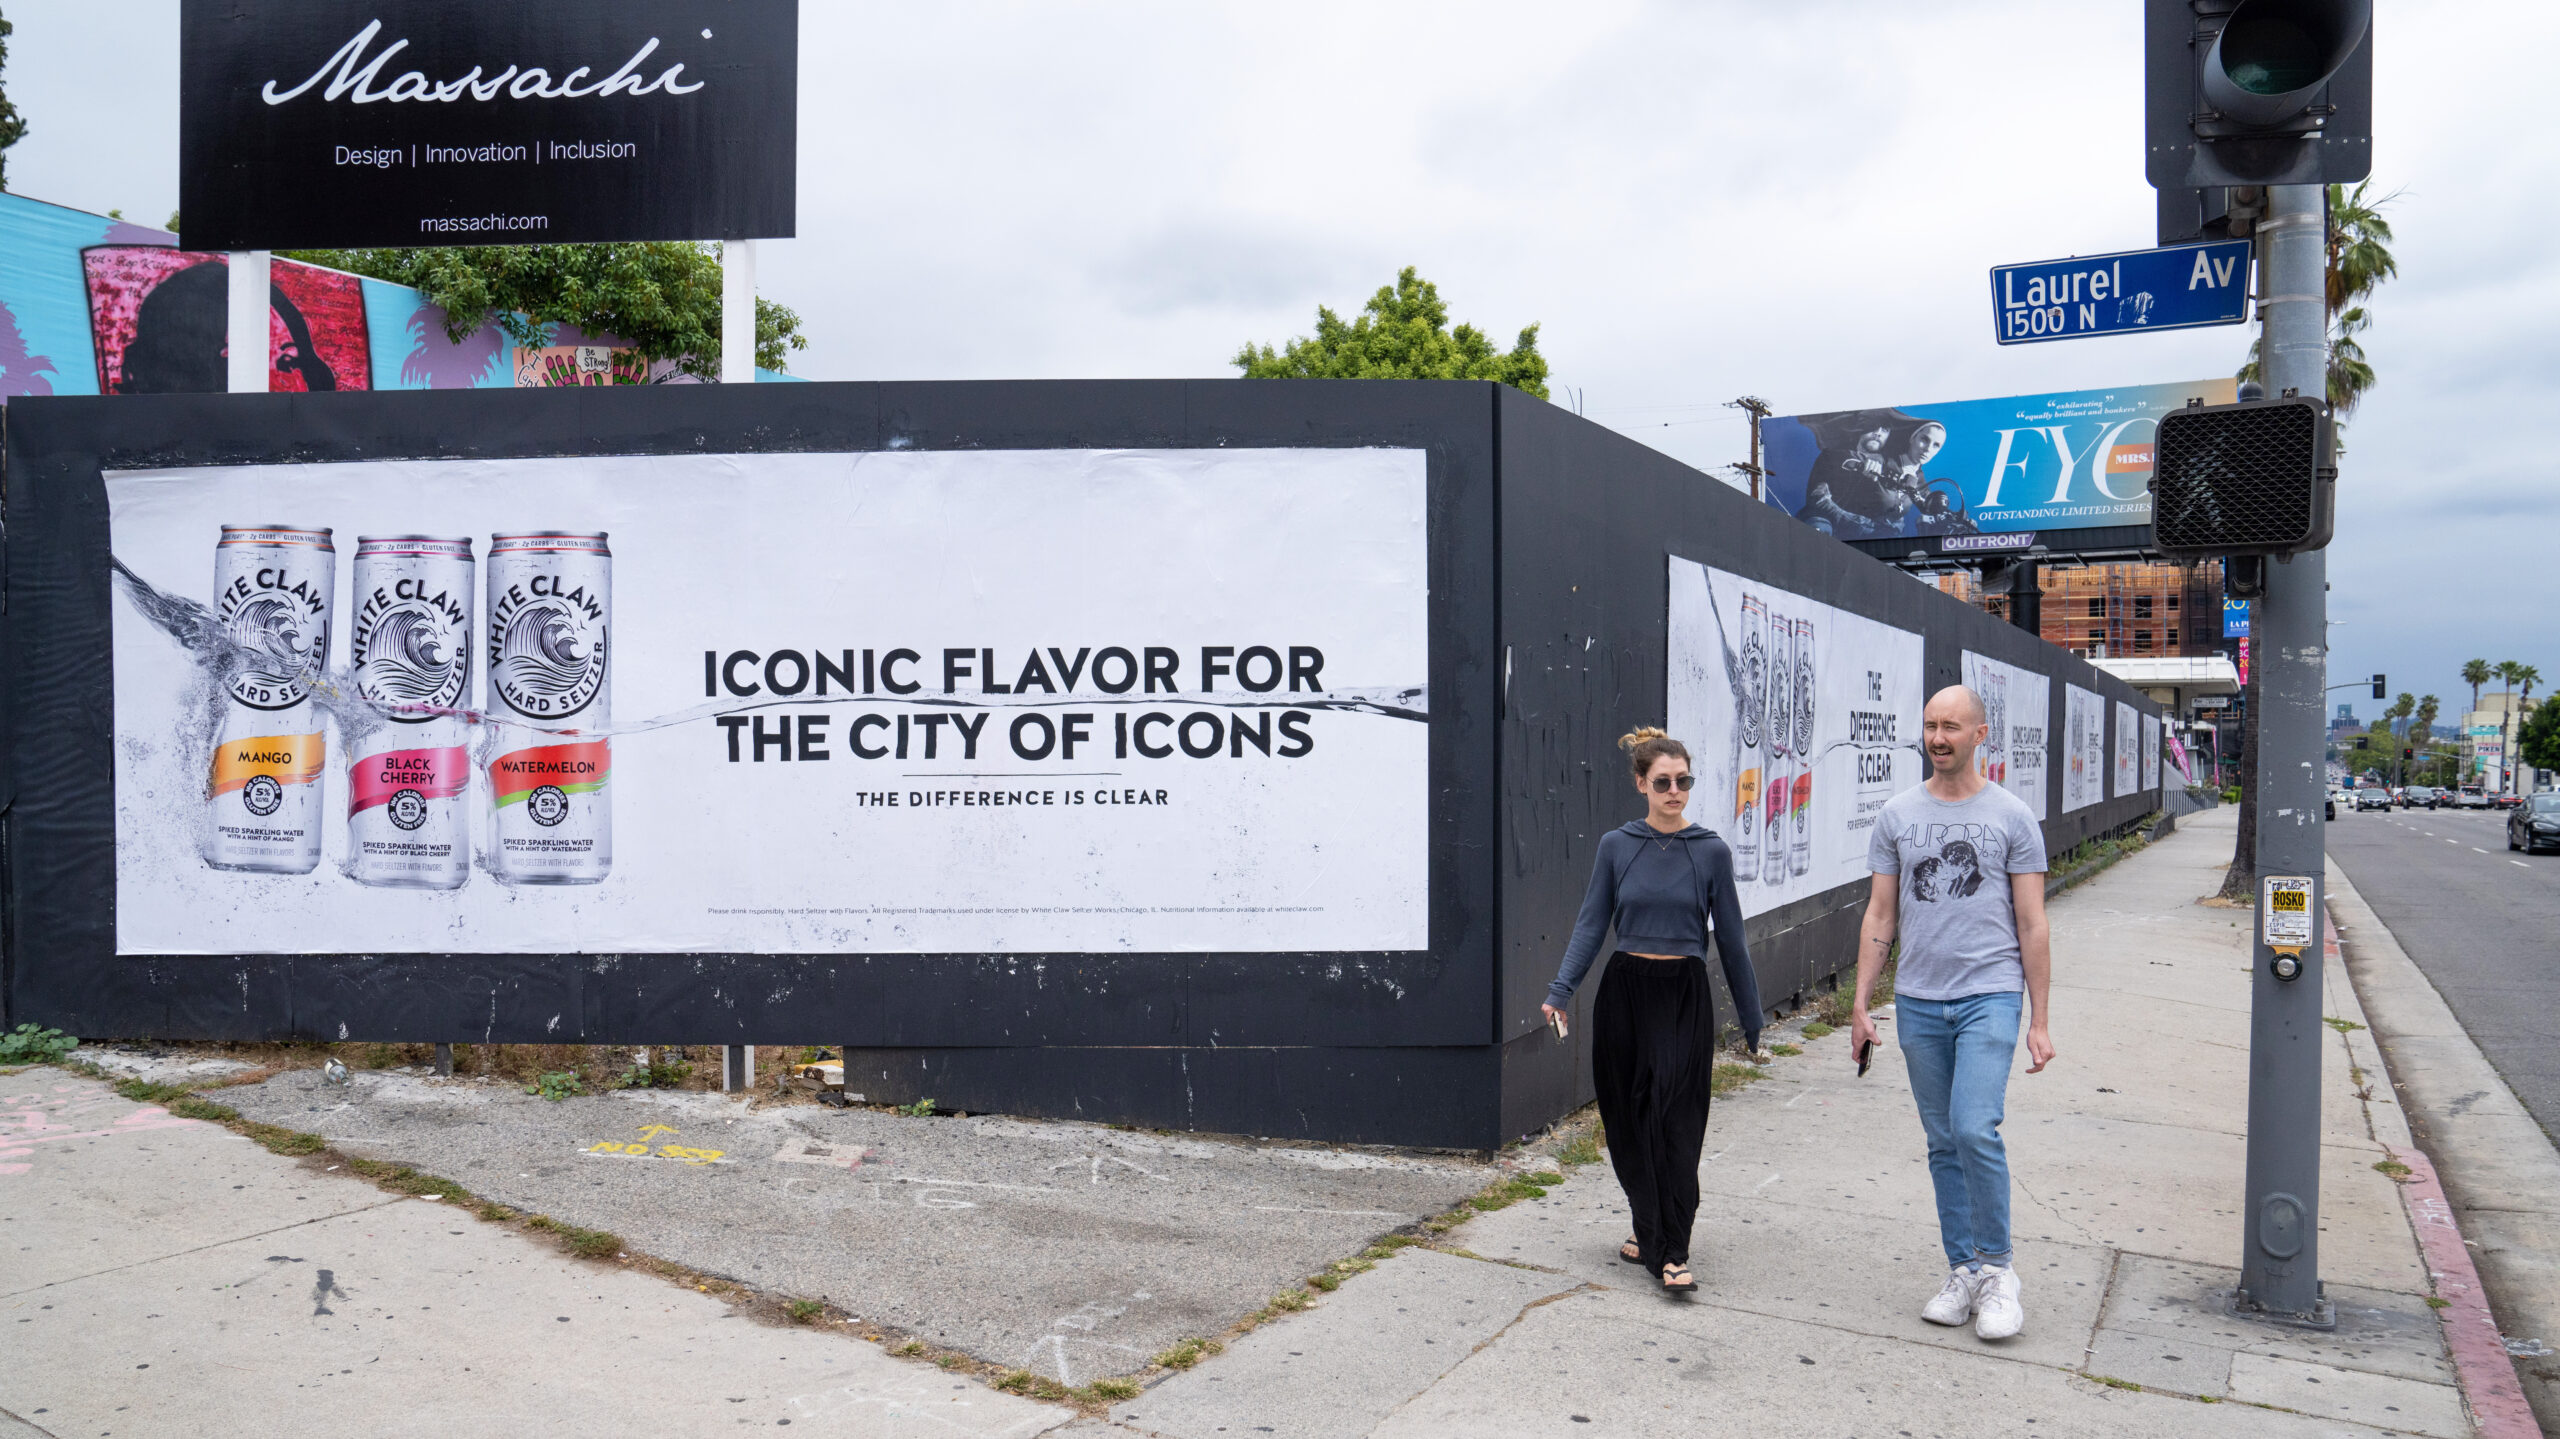 White Claw Outdoor Corner Barricade Ads LA Sunset Blvd and N Laurel Ave